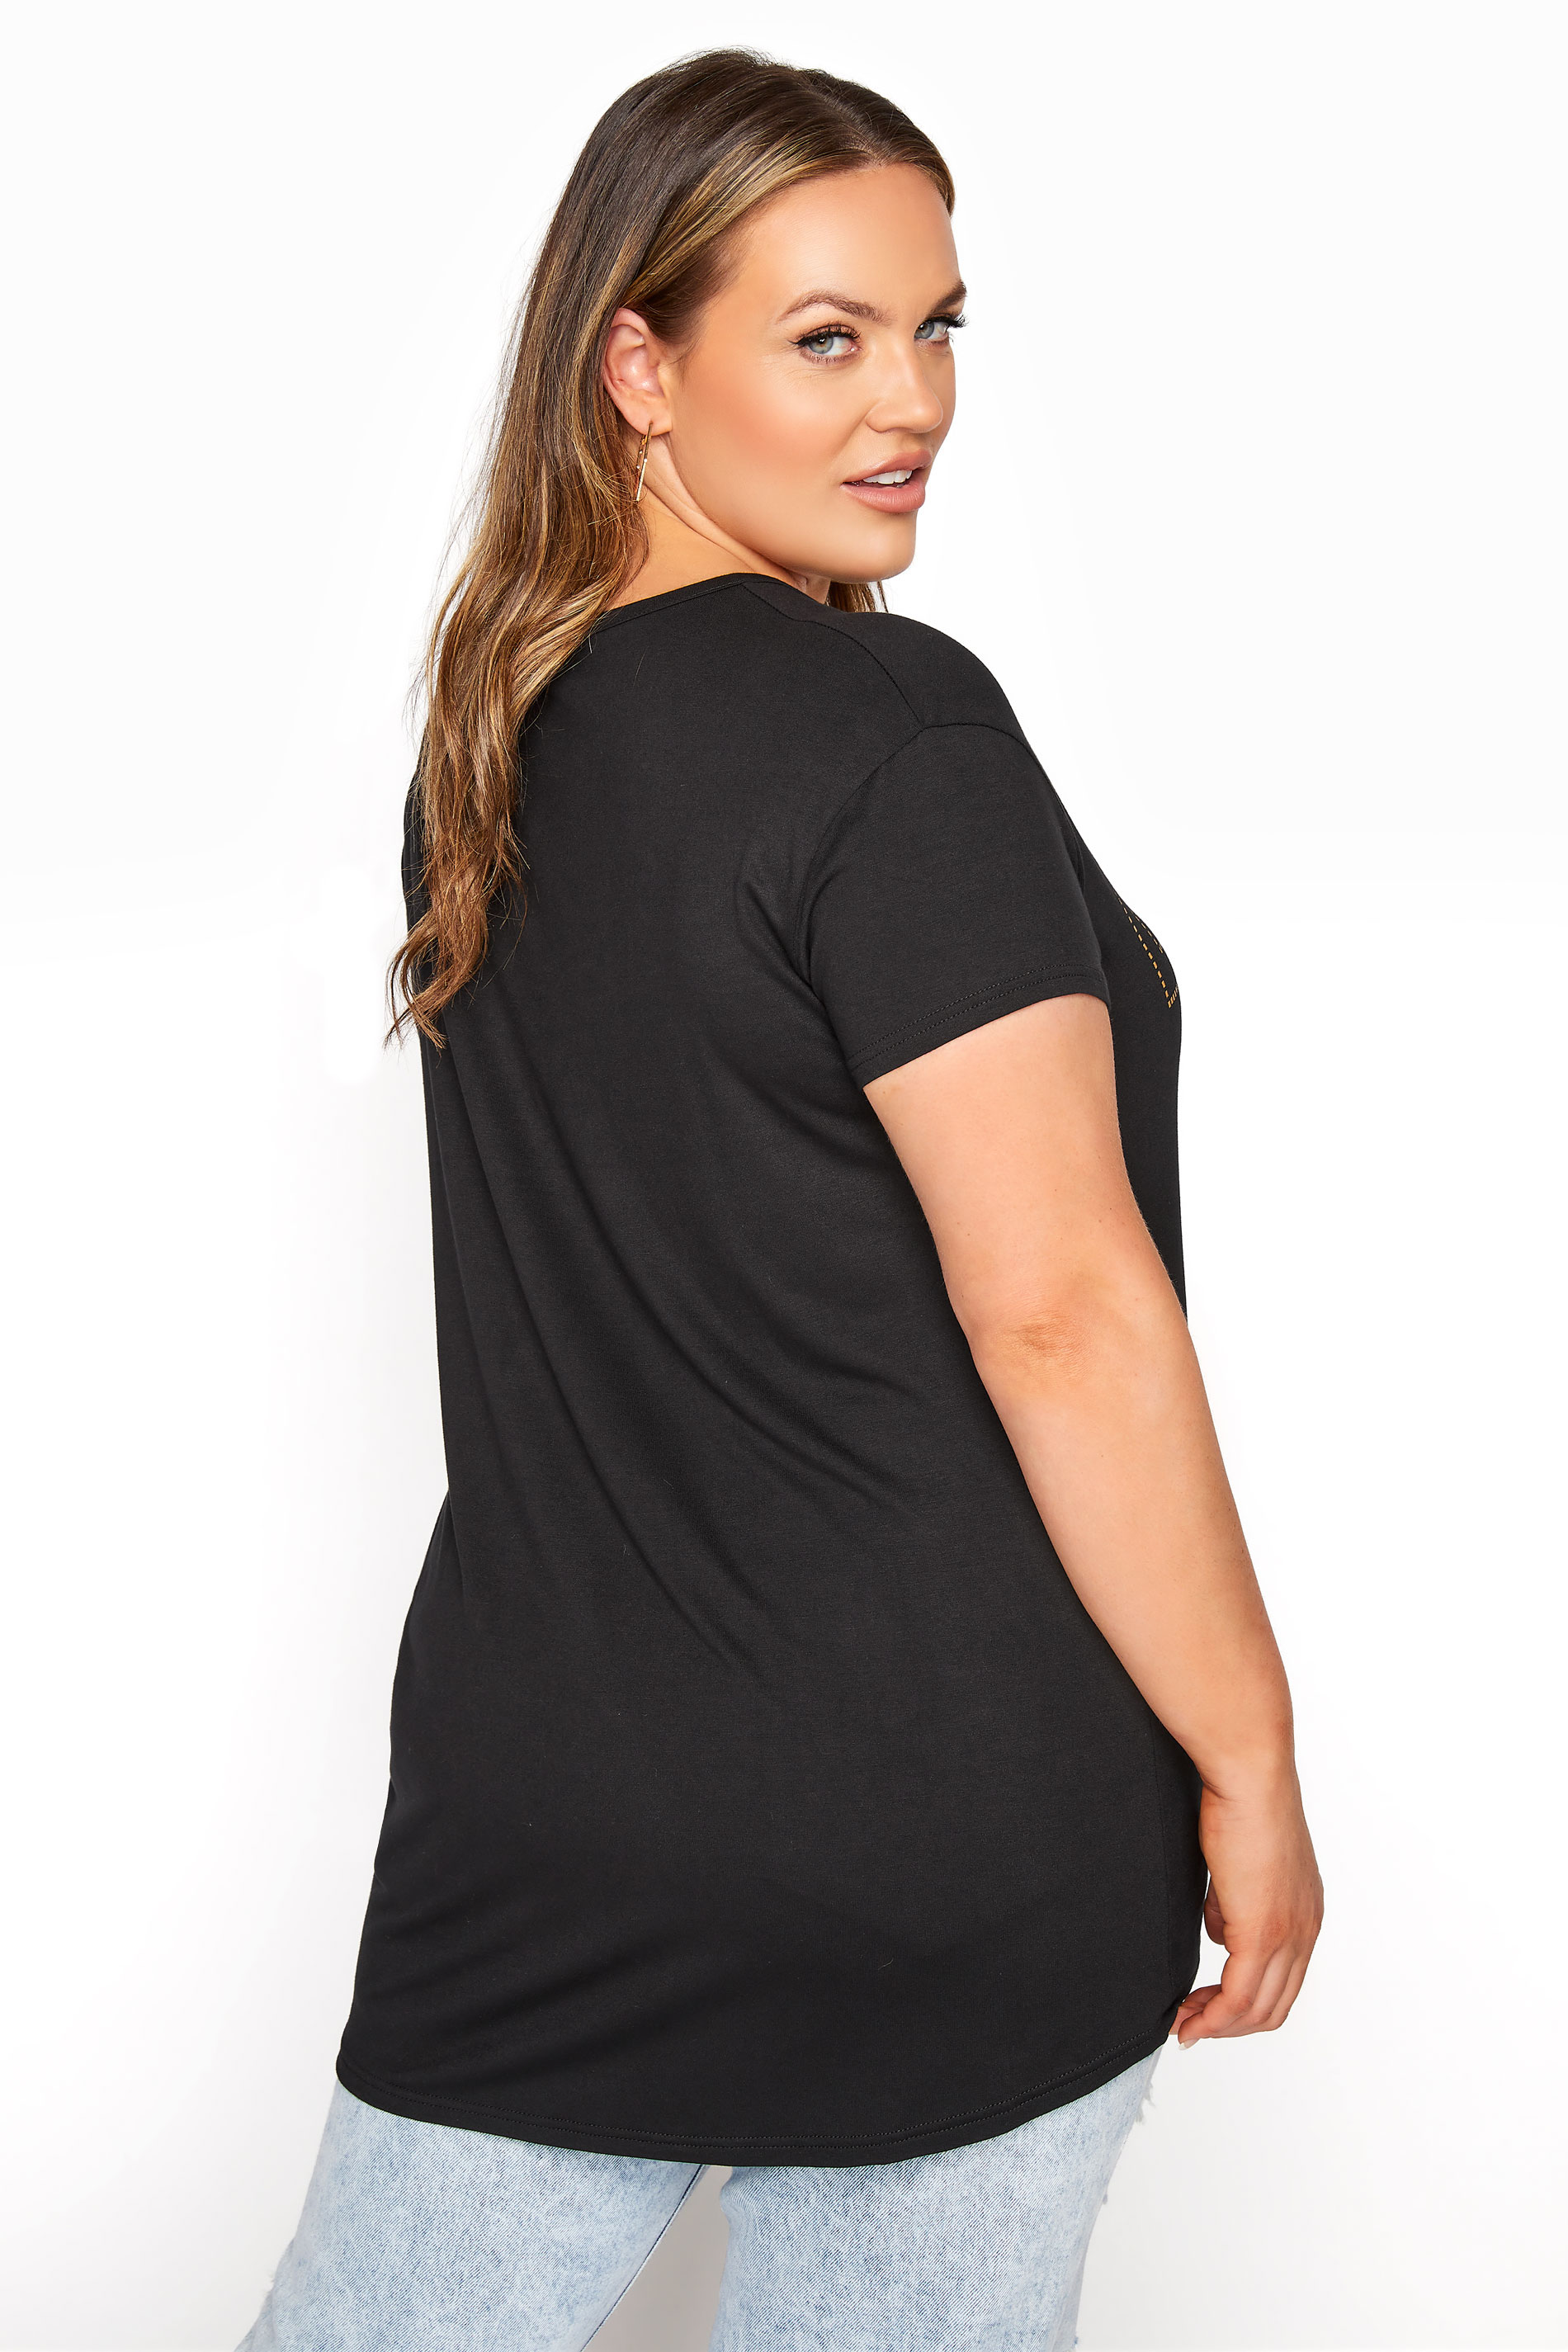 Grande taille  Tops Grande taille  T-Shirts | LIMITED COLLECTION - T-Shirt Noir 'Love' Animal - EN53124